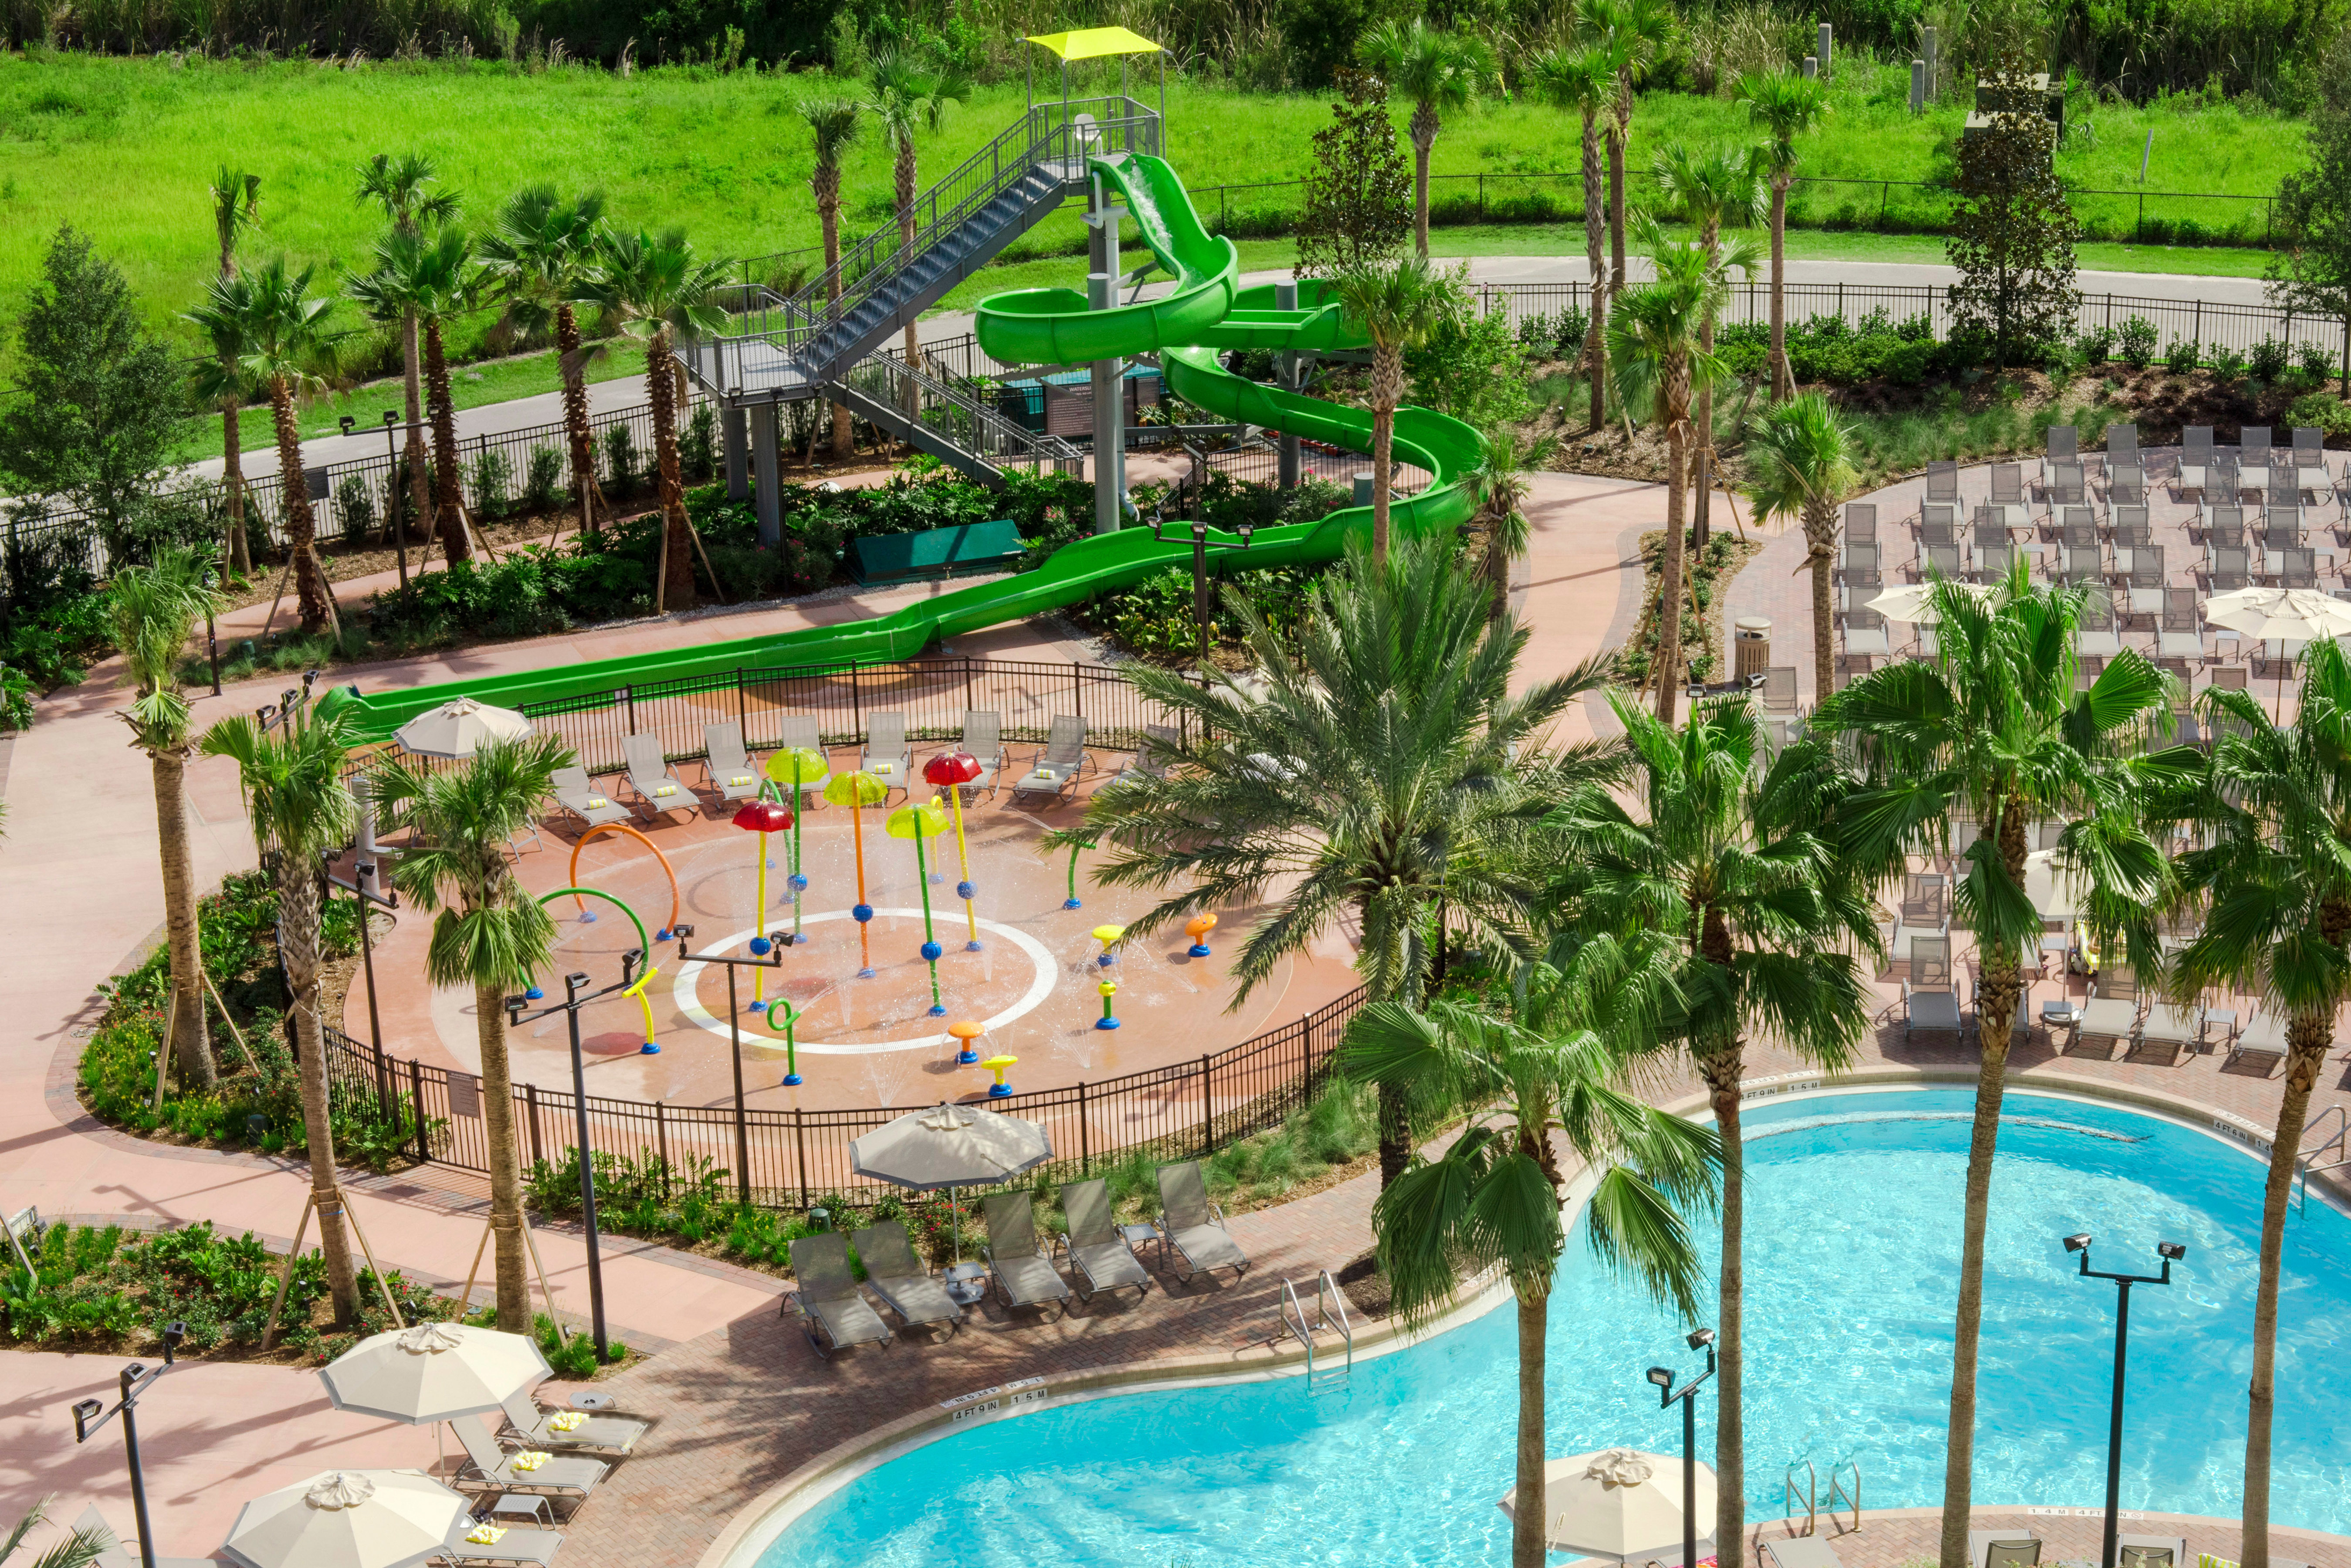 Pool with Splashpad and Water Slide